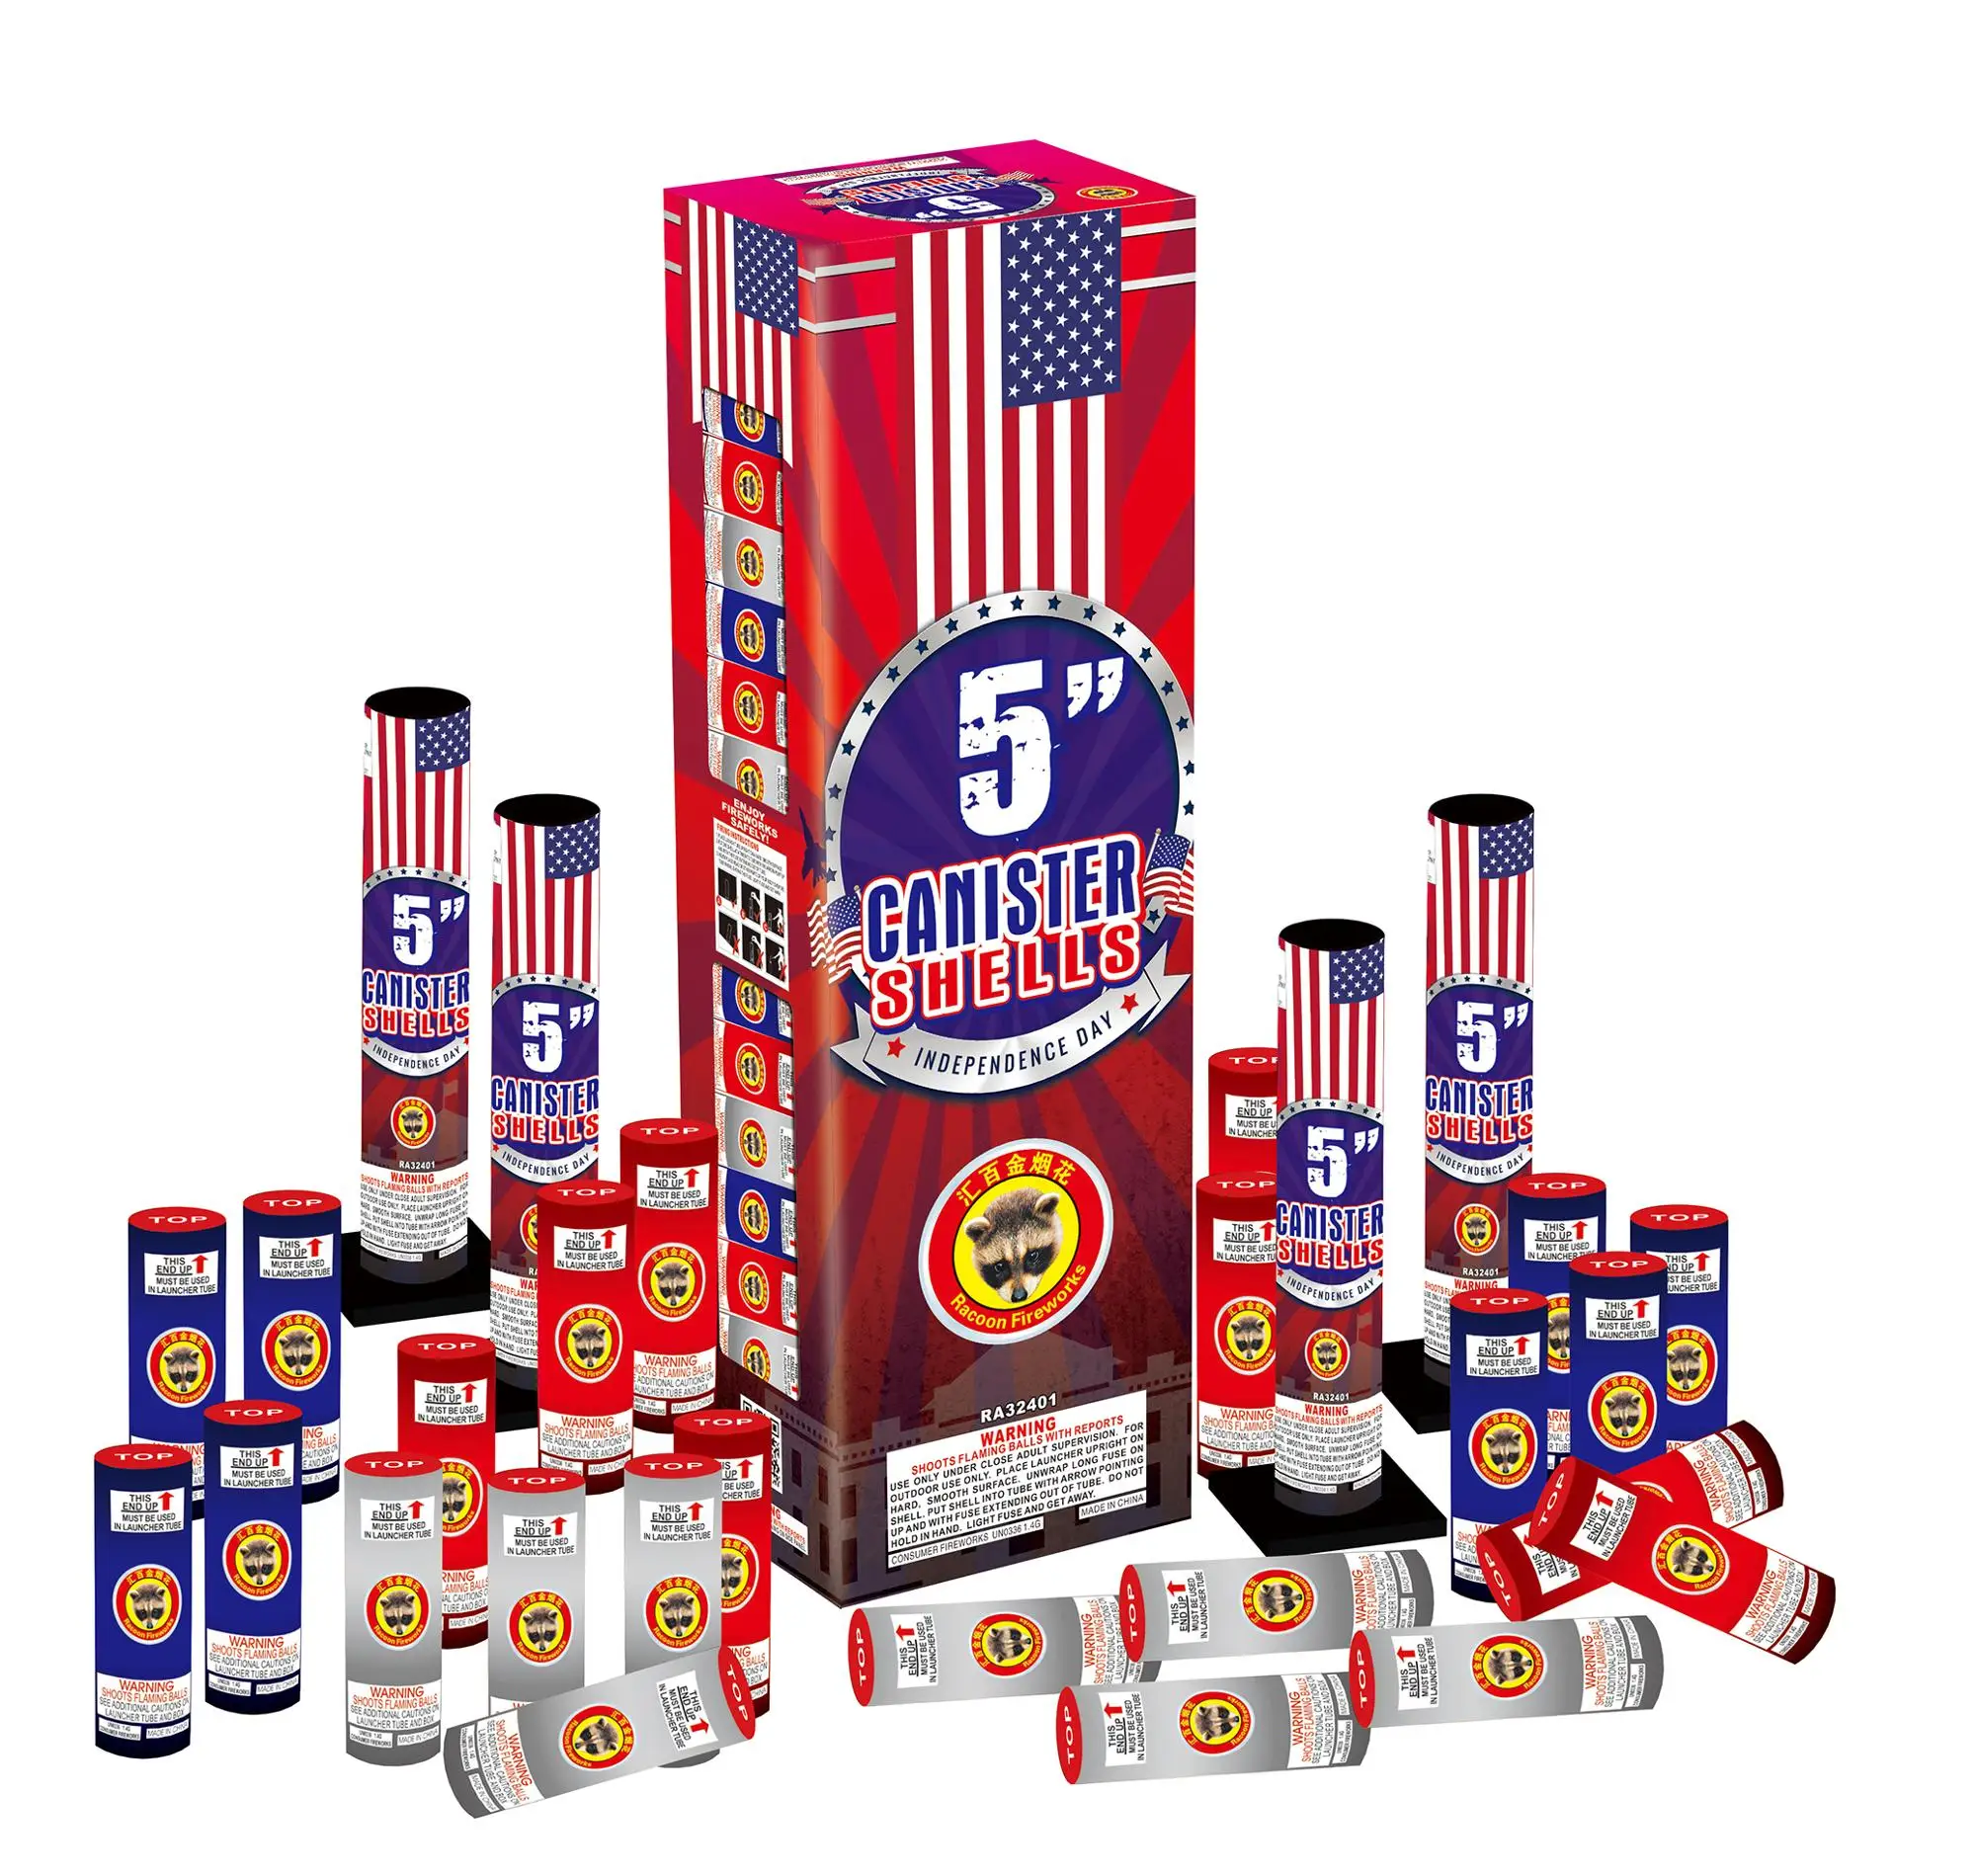 Hot Sale Ra32401 Xl 5-inch Canister Shells Fireworks Prices - Buy ...